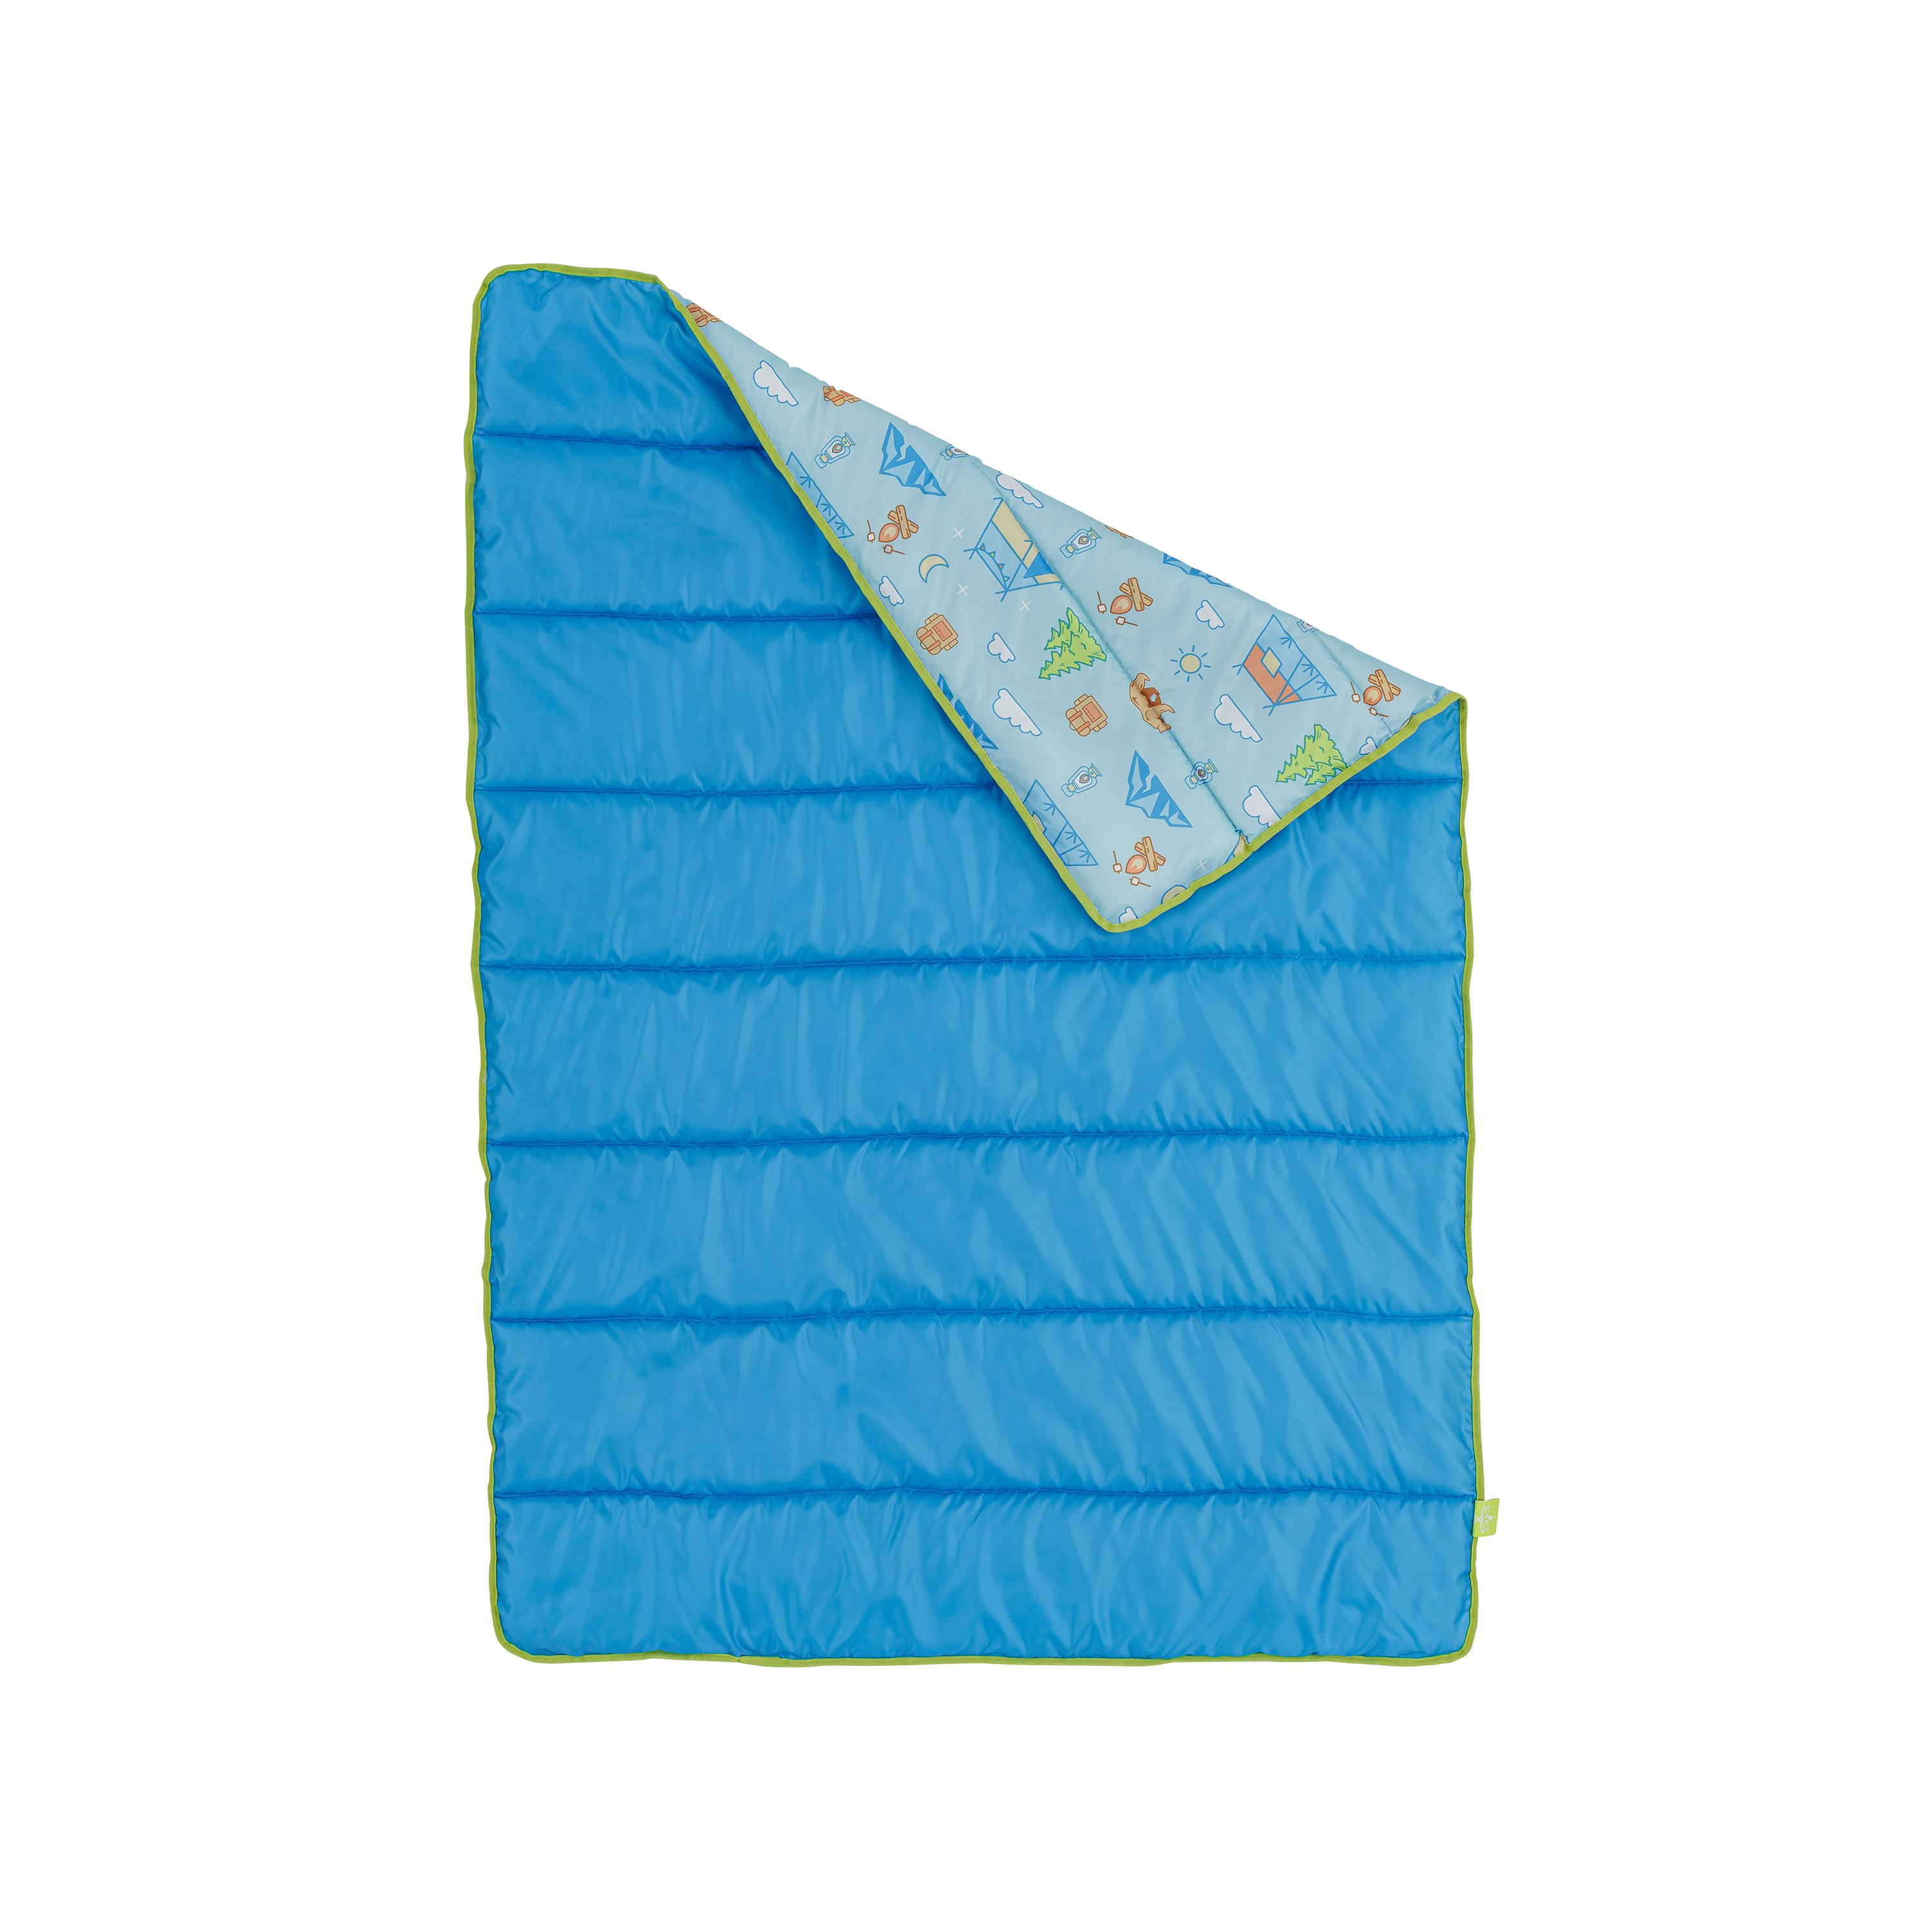 Firefly! Outdoor Gear Rectangular Youth Camp Blanket - Blue (60 in. x 40 in.) - image 1 of 15